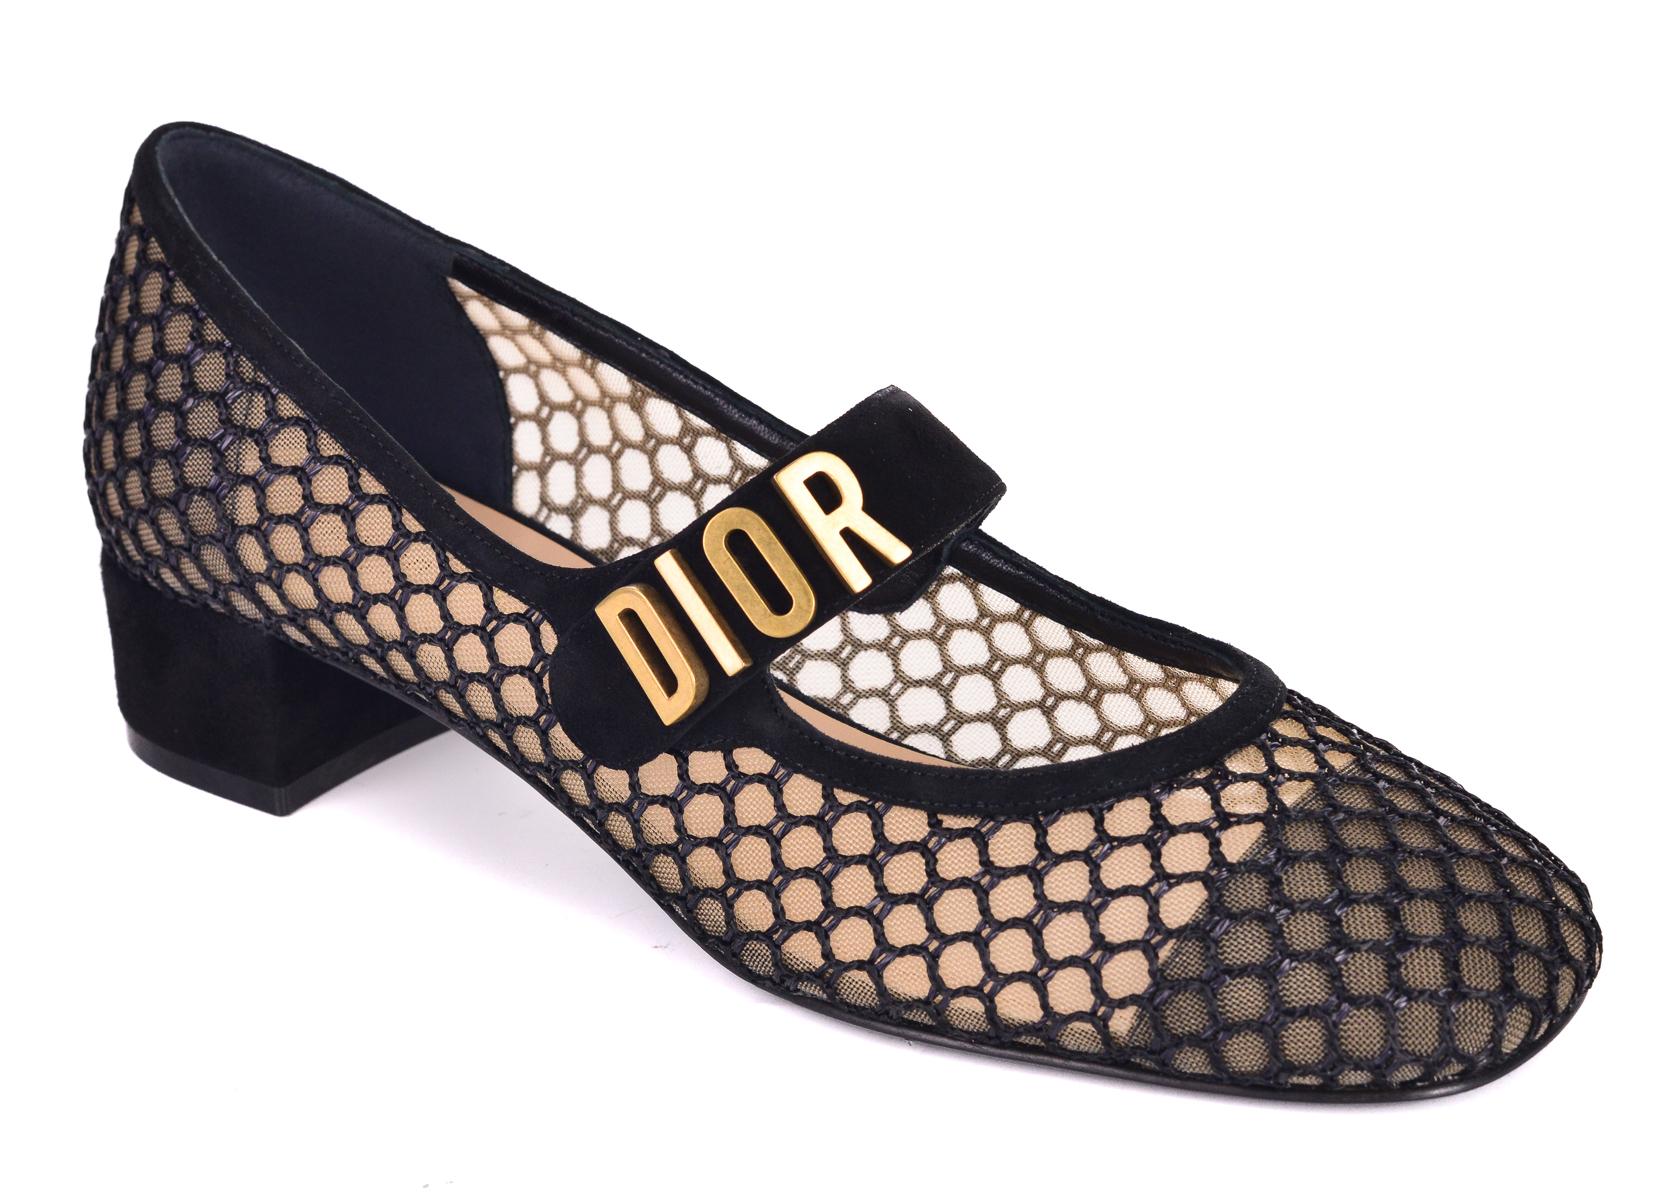 Christian Dior's Baby-D mesh pumps. These pumps feature a cap toe silhouette with mesh detailing and a Dior gold-tone hardware logo. Pair with regular blue denims for a chic and sophisticated everyday look.

Christian Dior's Baby-D mesh pumps
Suede